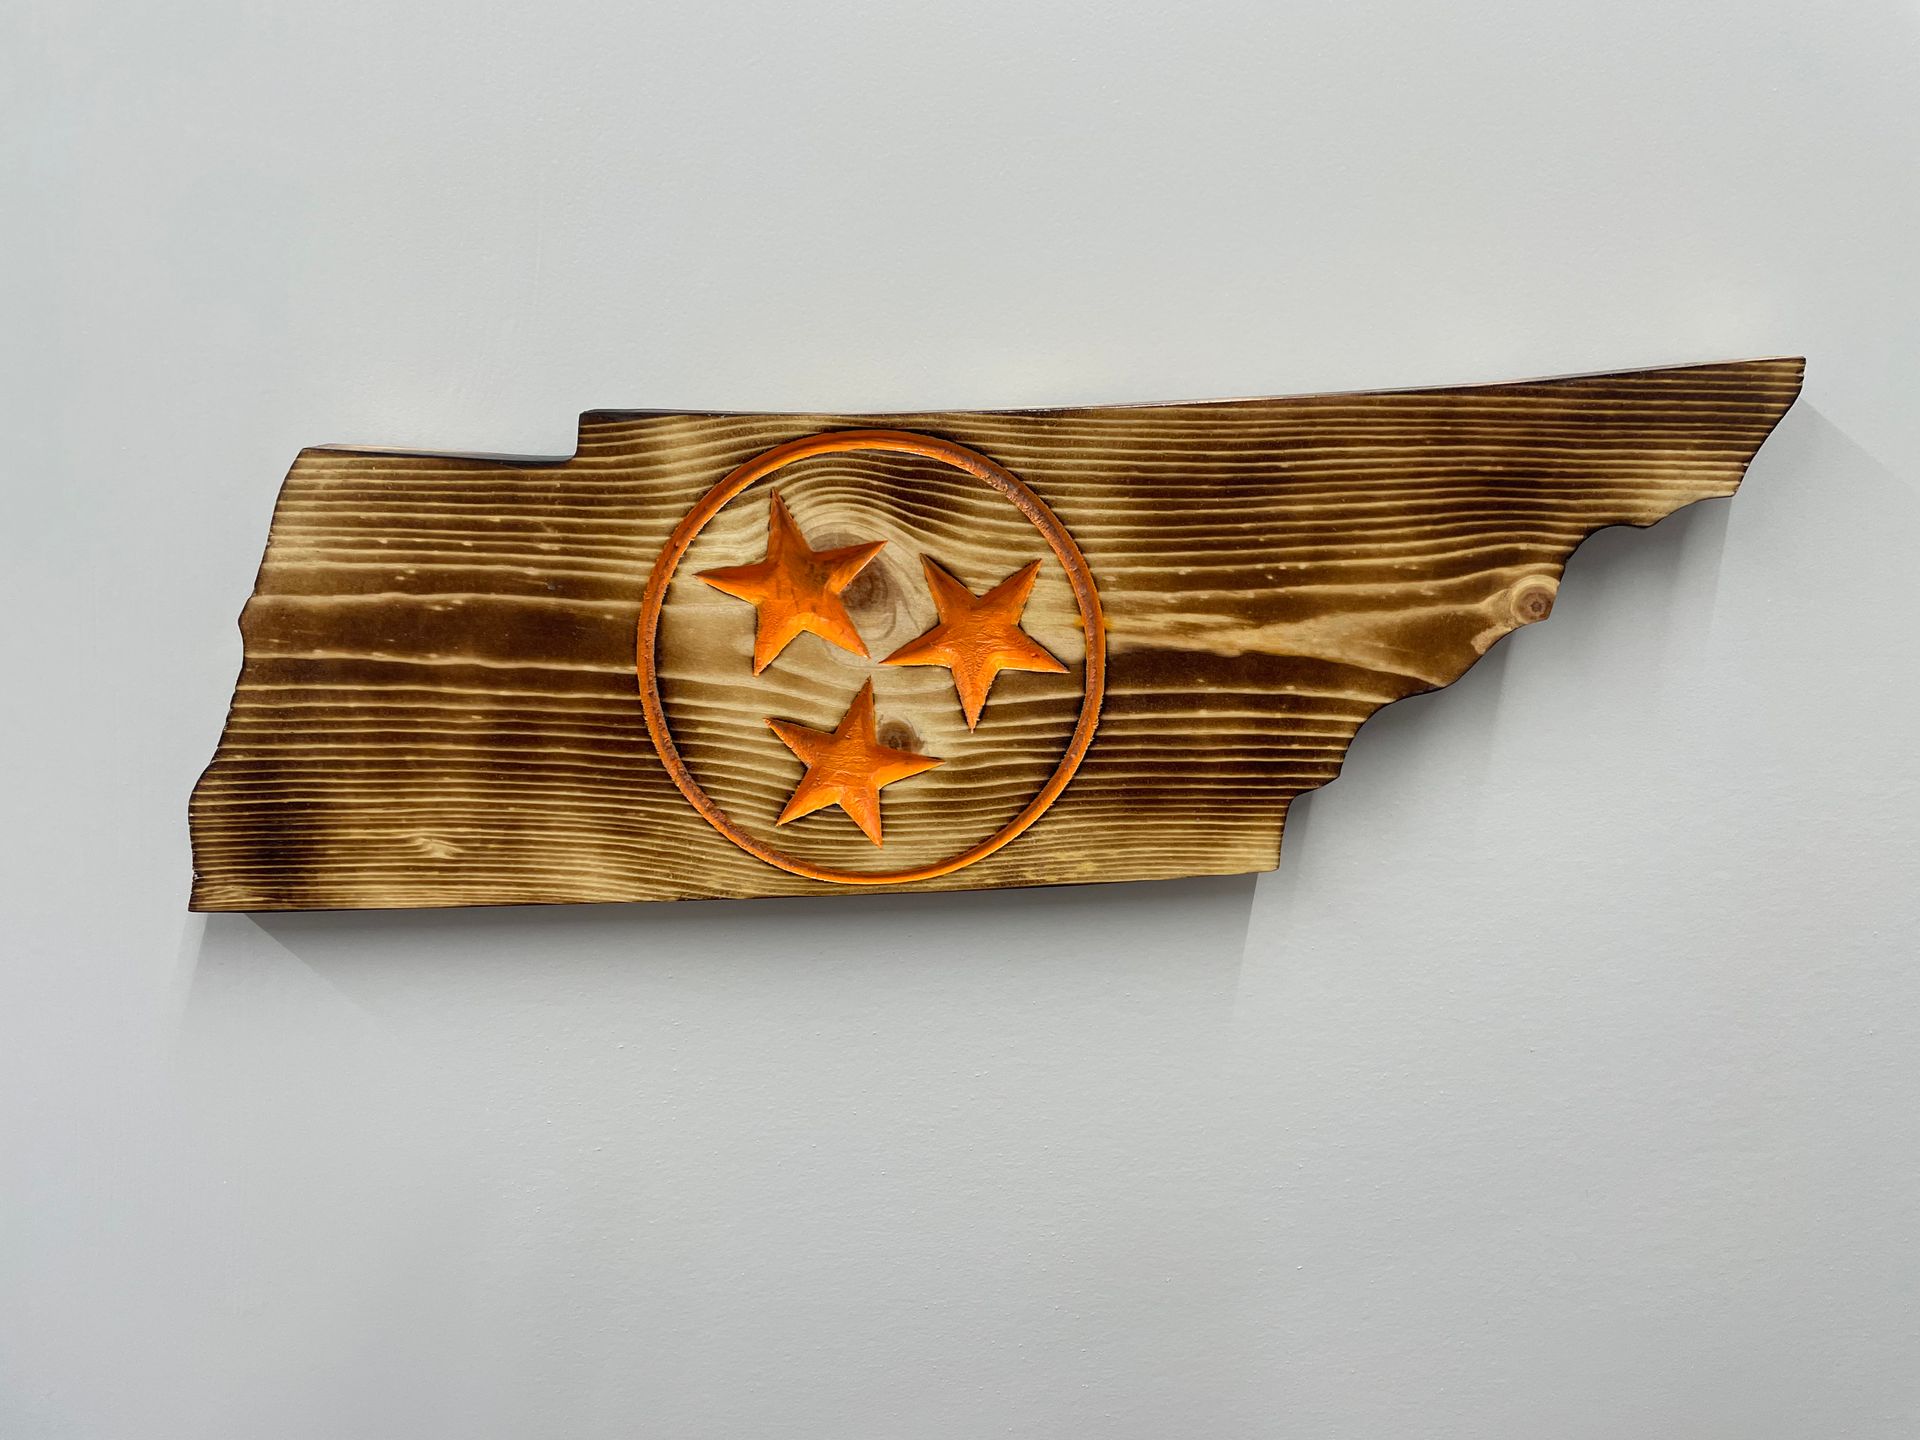 A wooden map of tennessee with the state flag carved into it.